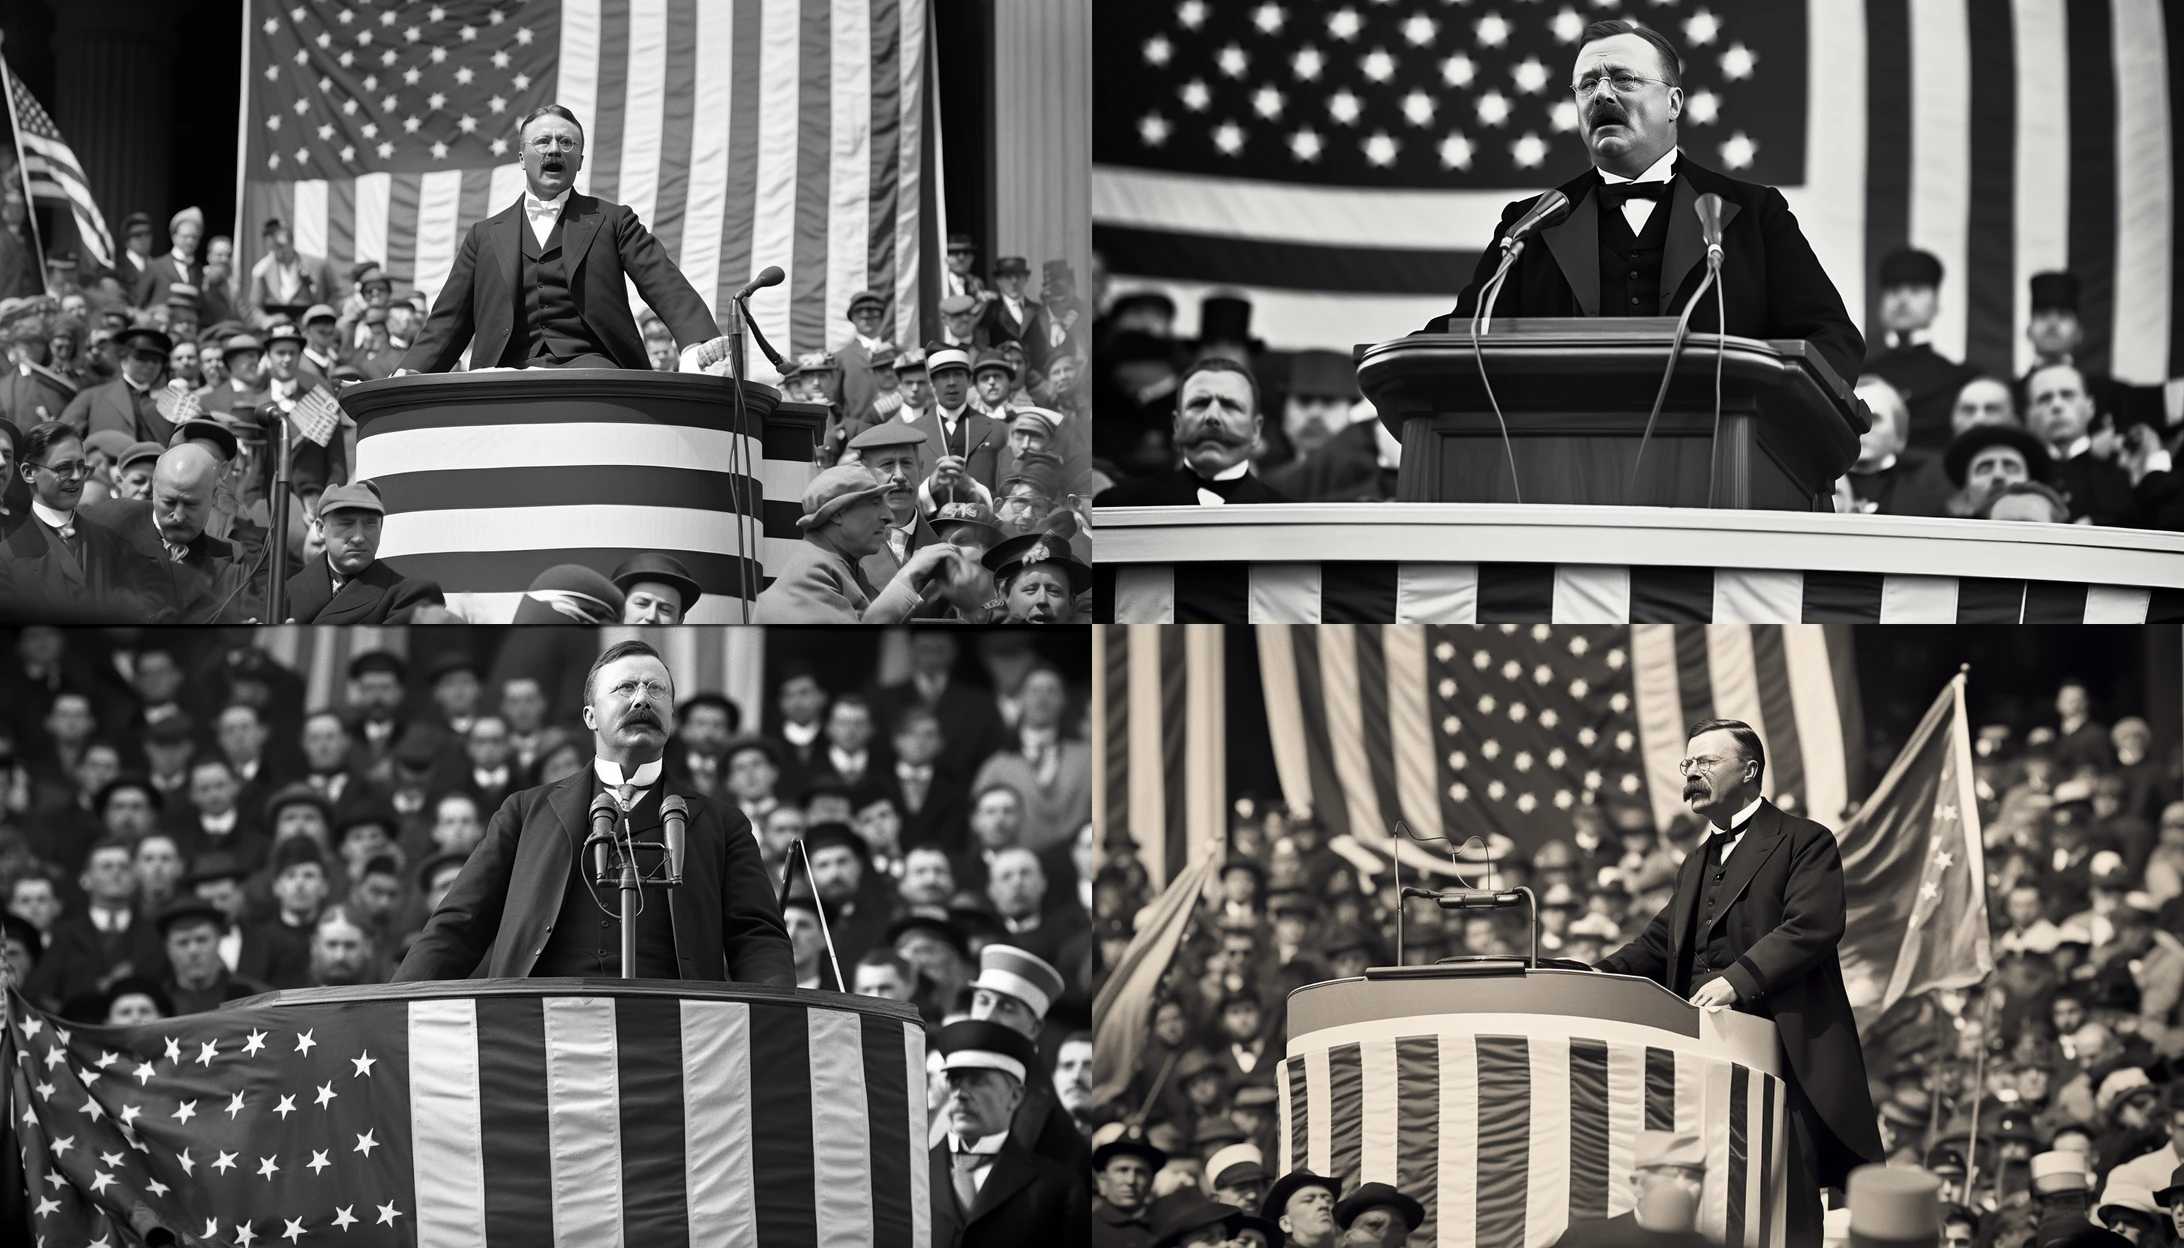 President Theodore Roosevelt addressing Congress on Oklahoma's statehood - An iconic image of Roosevelt delivering his speech announcing Oklahoma's official statehood. (Taken with Canon EOS 5D Mark IV)